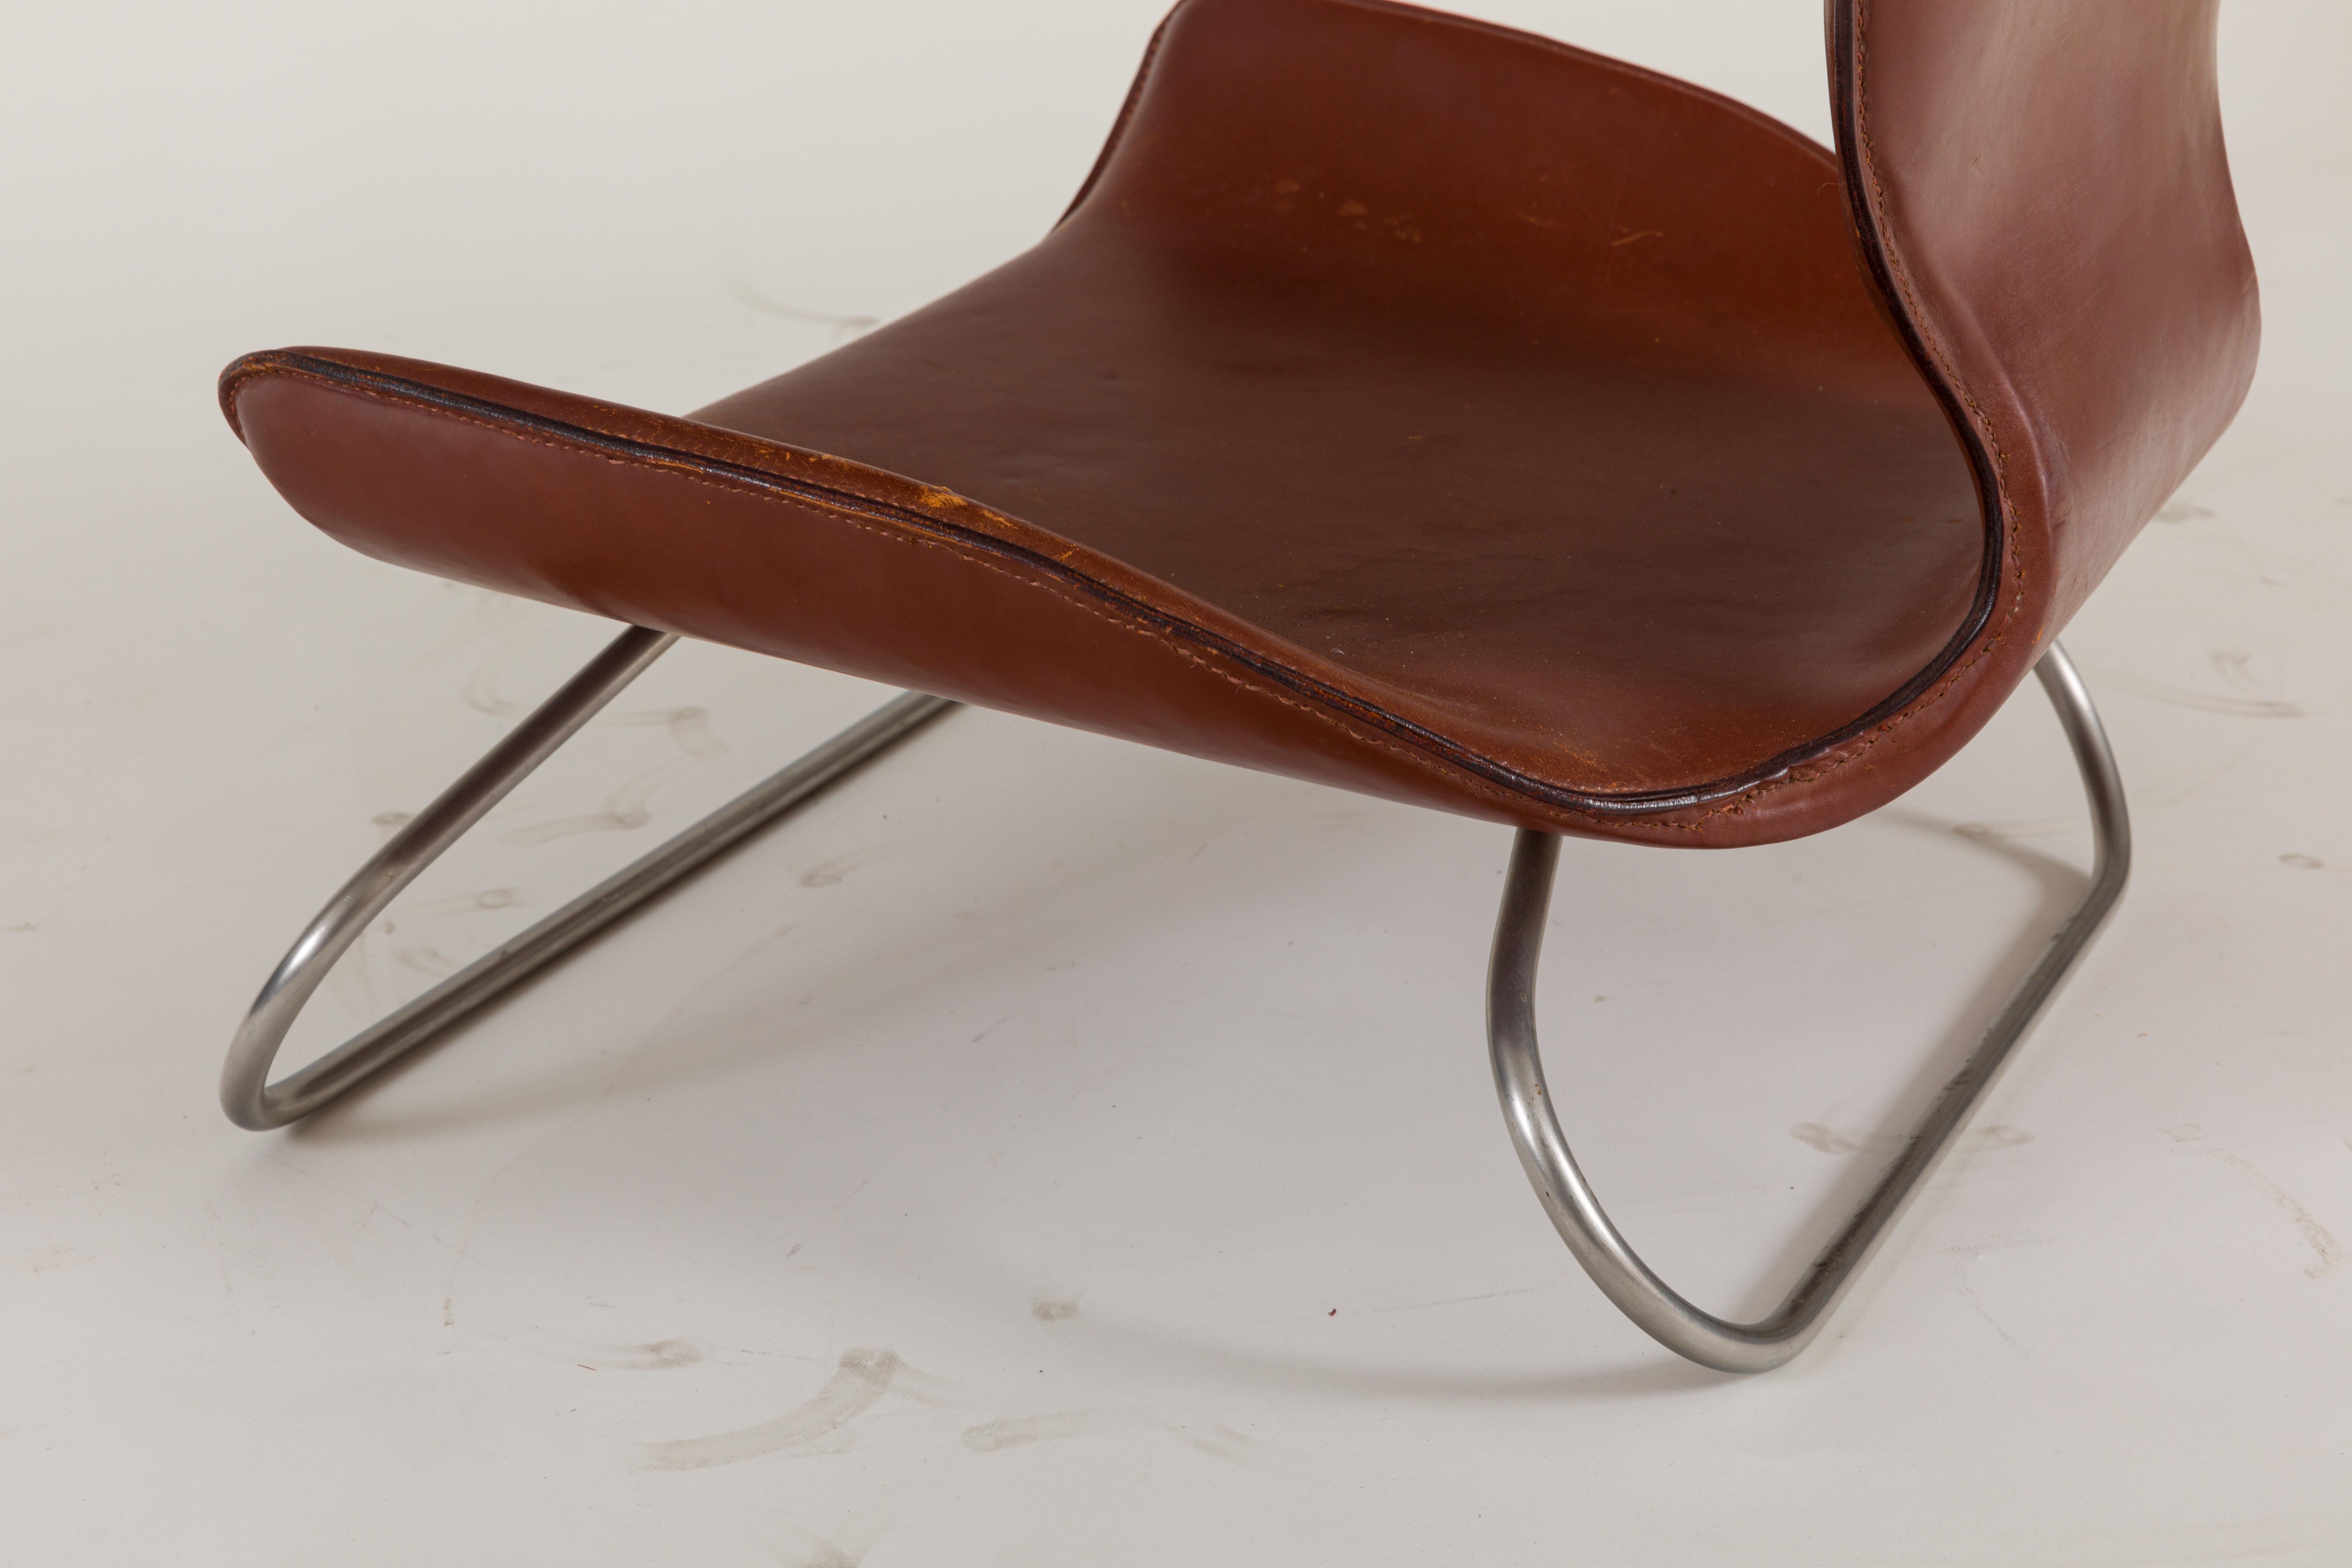 Contemporary K-3 Low Leather Chair by Kirsten Jones & Adam Bottomley for KOI, England, 2000s For Sale